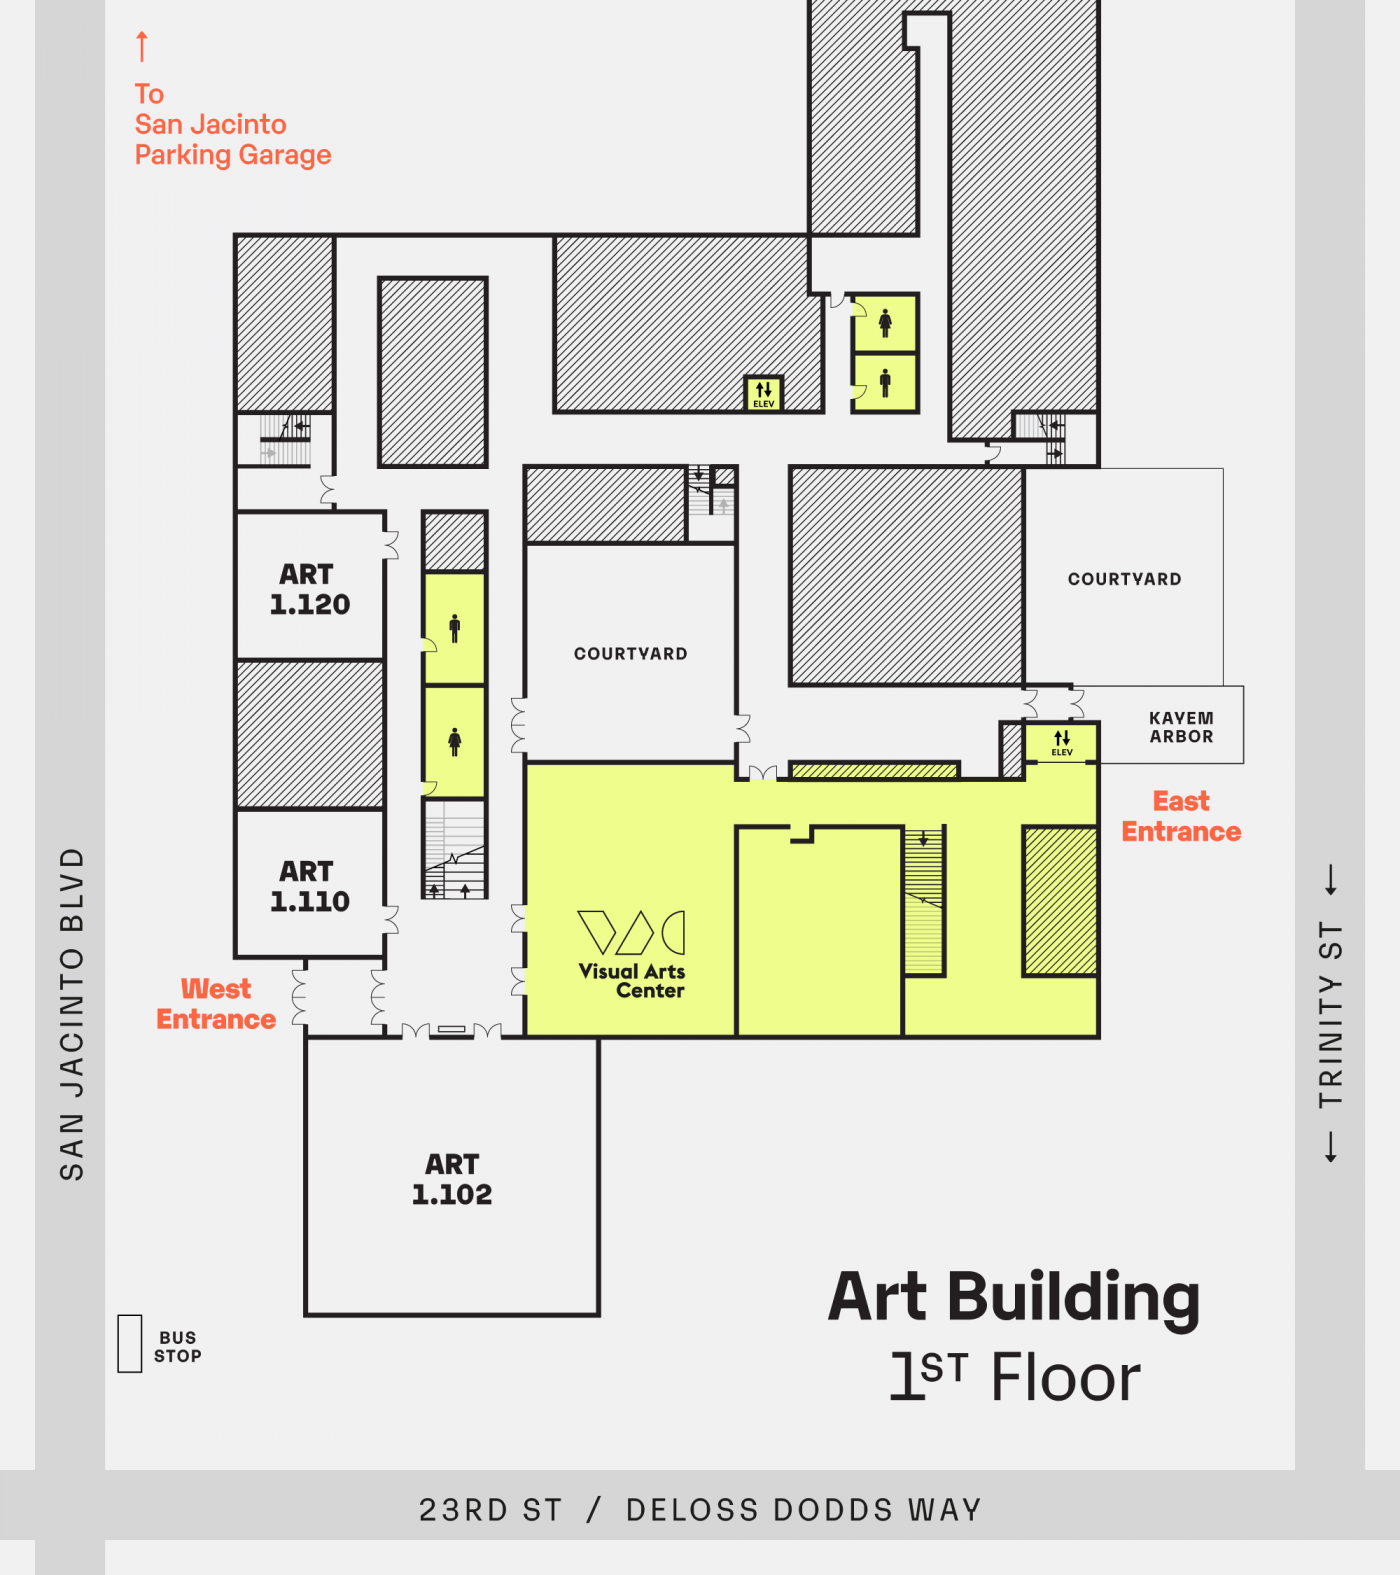 map of first floor of Art Building at UT Austin